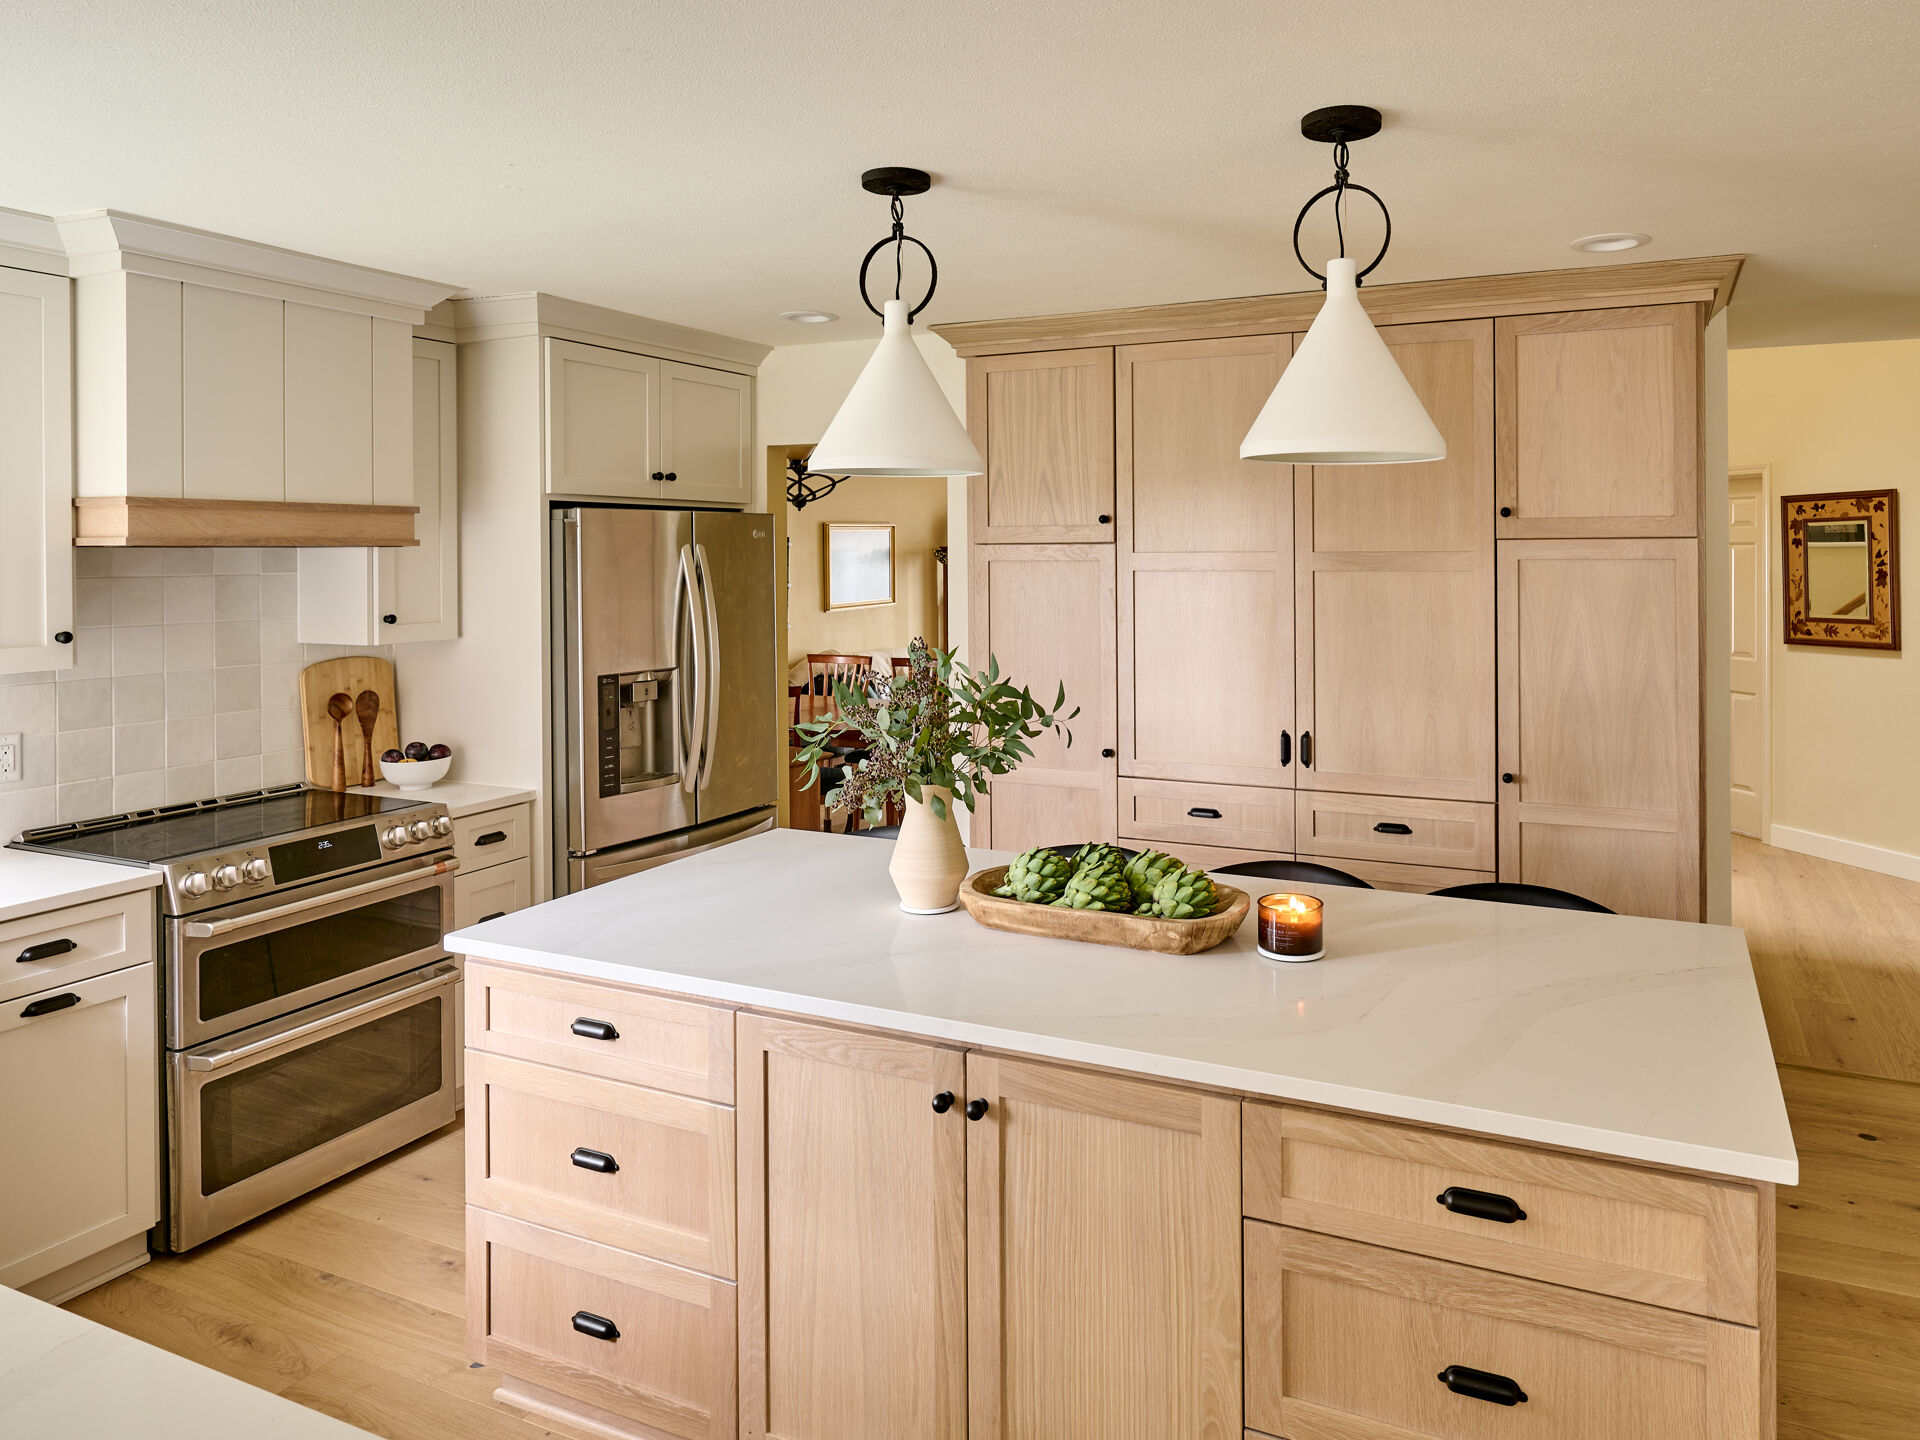 Large island with ample seating, counterspace and storage in Kitchen remodel by Powell Construction